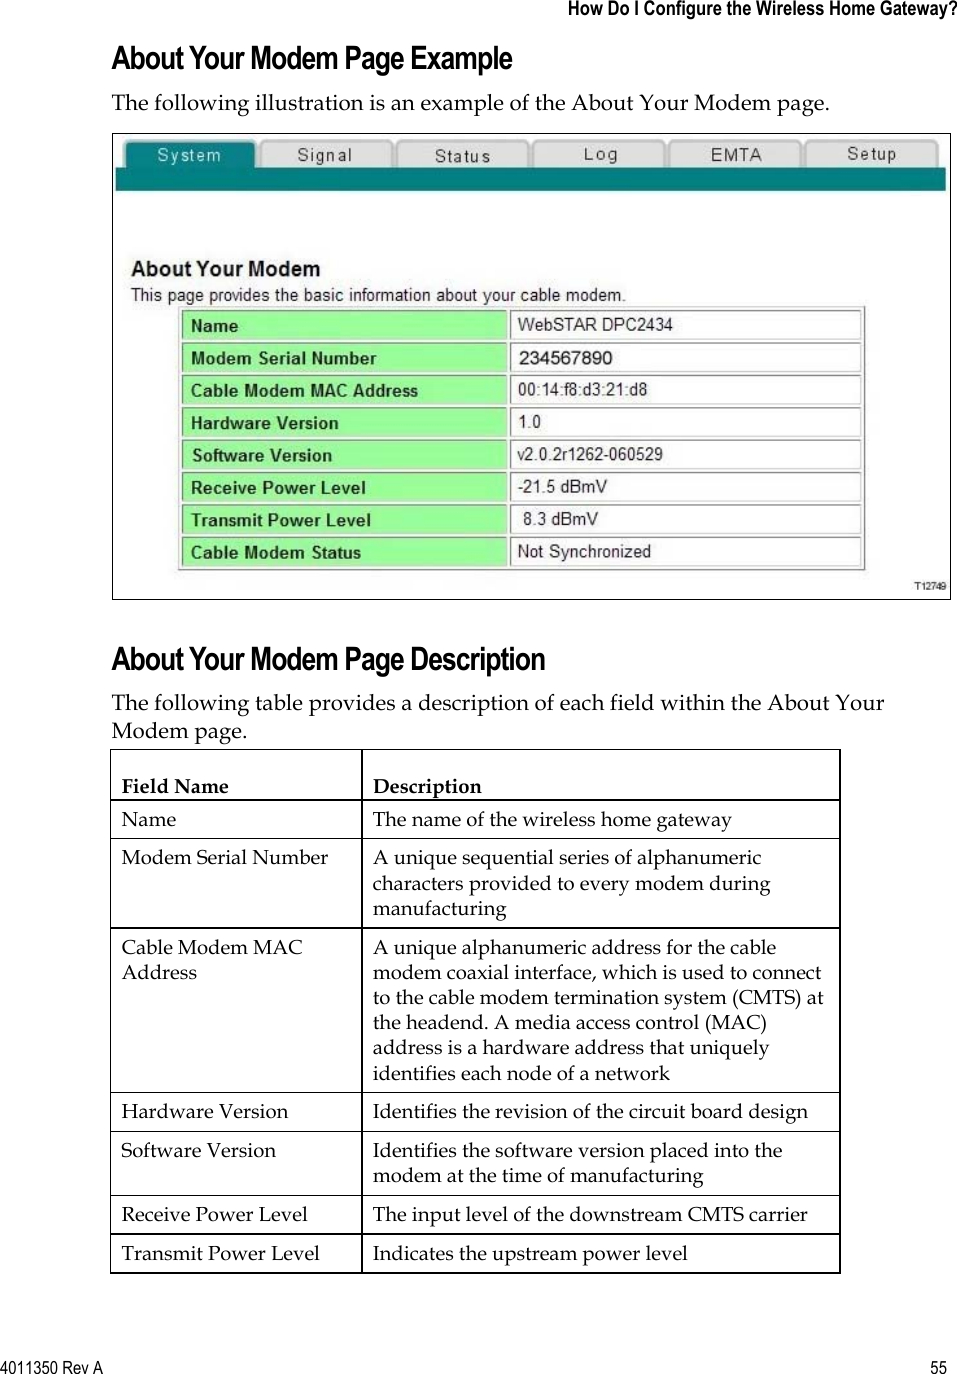 4011350 Rev A    55   How Do I Configure the Wireless Home Gateway?About Your Modem Page Example The following illustration is an example of the About Your Modem page. About Your Modem Page Description The following table provides a description of each field within the About Your Modem page. Field Name  Description Name  The name of the wireless home gateway Modem Serial Number  A unique sequential series of alphanumeric characters provided to every modem during manufacturing Cable Modem MAC AddressA unique alphanumeric address for the cable modem coaxial interface, which is used to connect to the cable modem termination system (CMTS) at the headend. A media access control (MAC) address is a hardware address that uniquely identifies each node of a network Hardware Version  Identifies the revision of the circuit board design Software Version  Identifies the software version placed into the modem at the time of manufacturing Receive Power Level  The input level of the downstream CMTS carrier Transmit Power Level  Indicates the upstream power level 